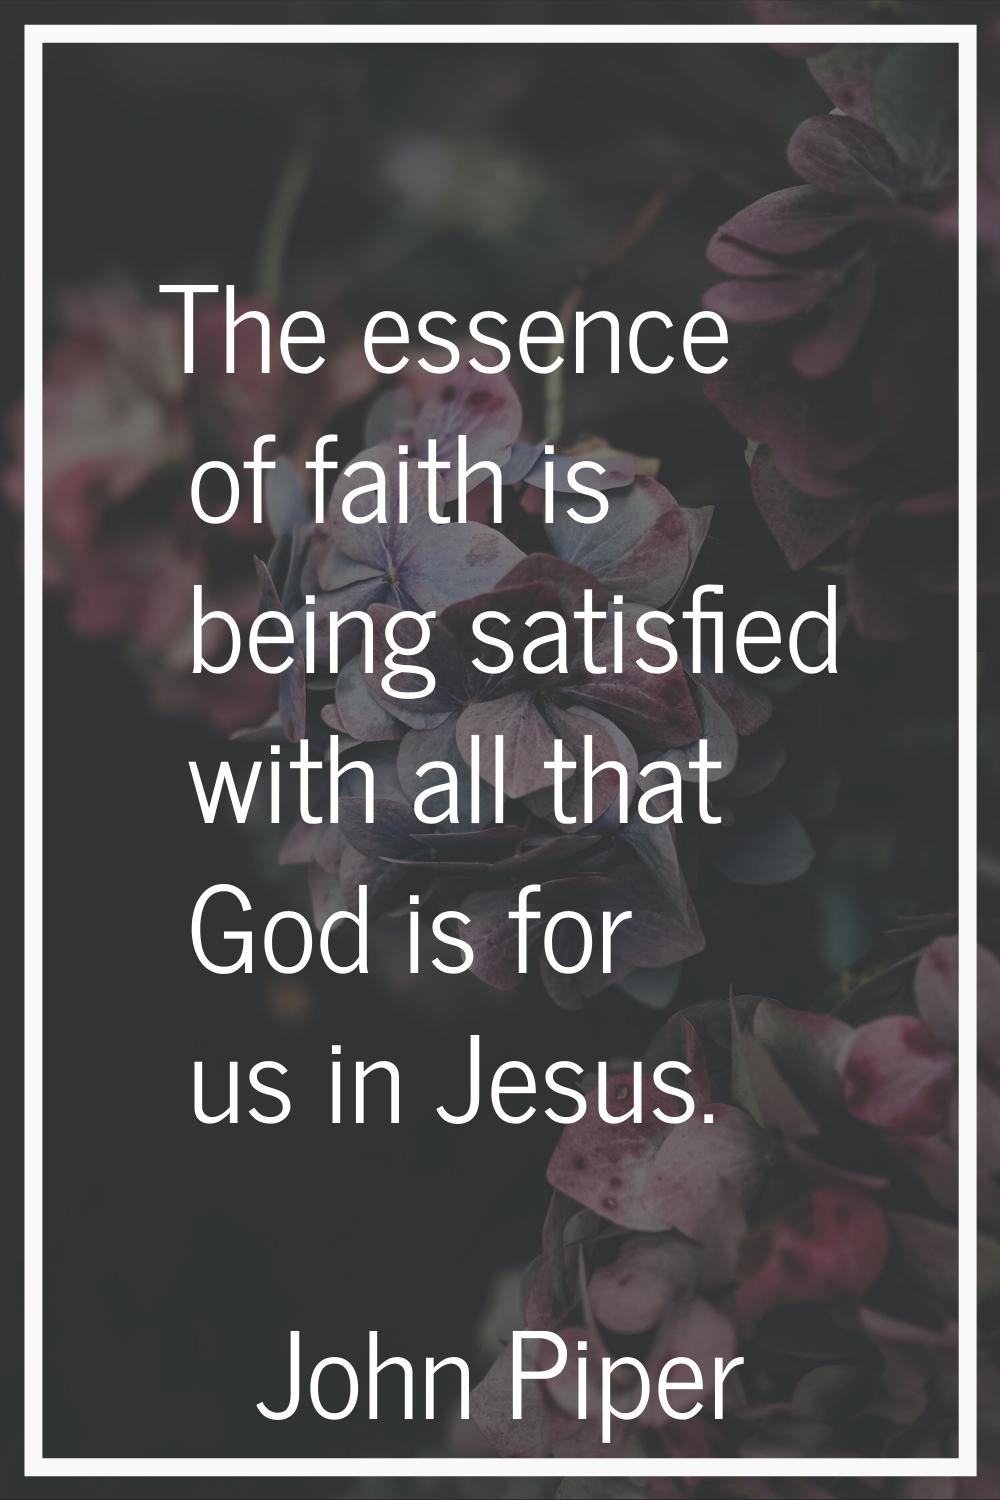 The essence of faith is being satisfied with all that God is for us in Jesus.